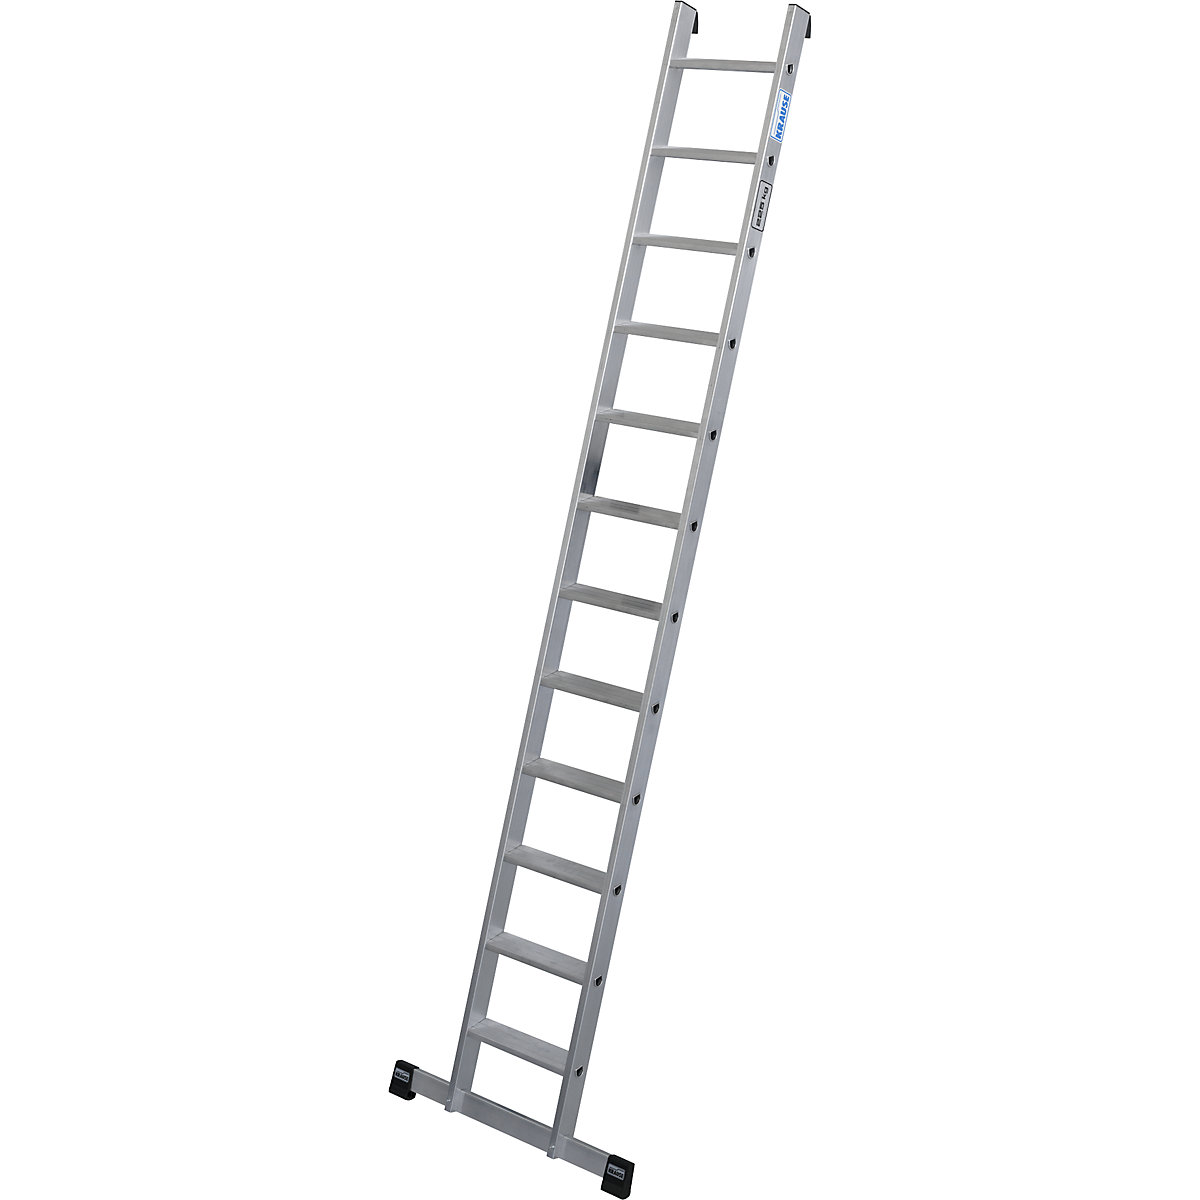 Heavy duty lean to ladder – KRAUSE, 80 mm aluminium steps, up to 225 kg, 12 steps-4